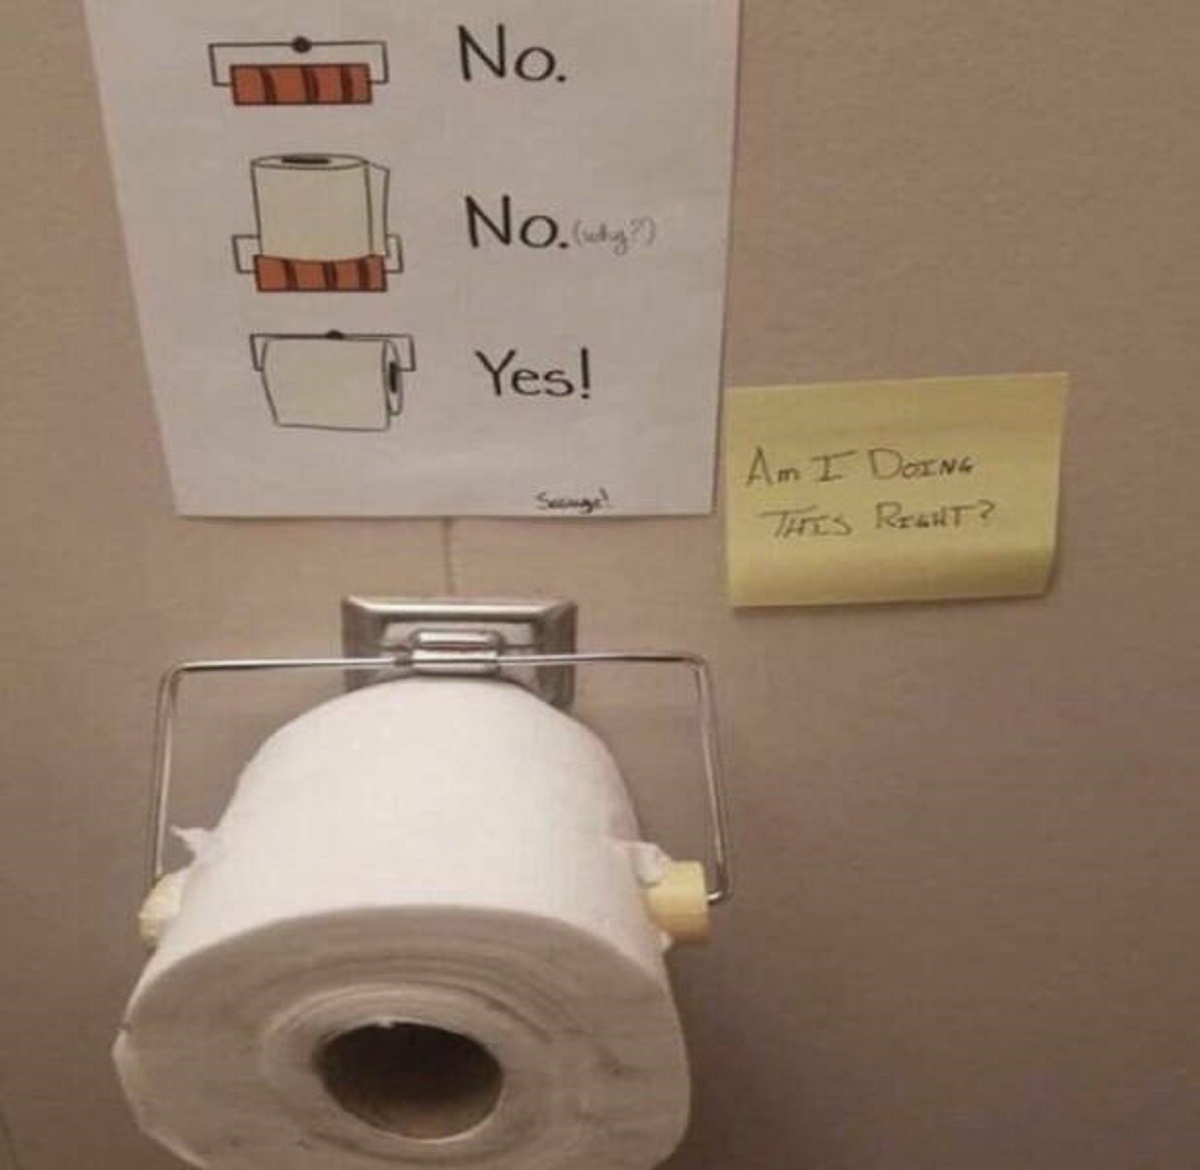 35 People Who Had One Job and Failed 